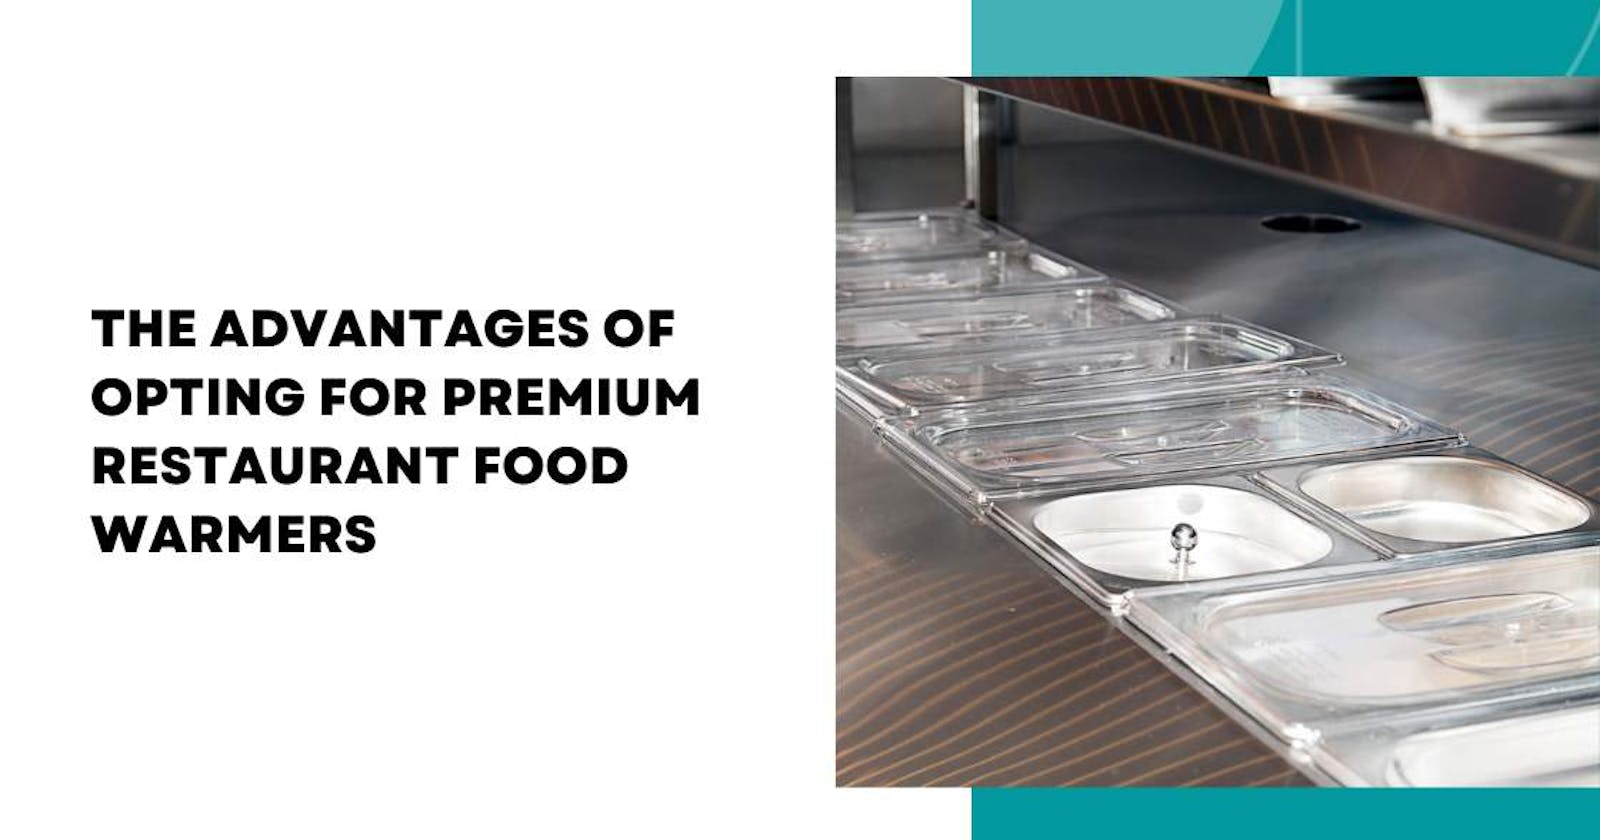 The Advantages of Opting for Premium Restaurant Food Warmers